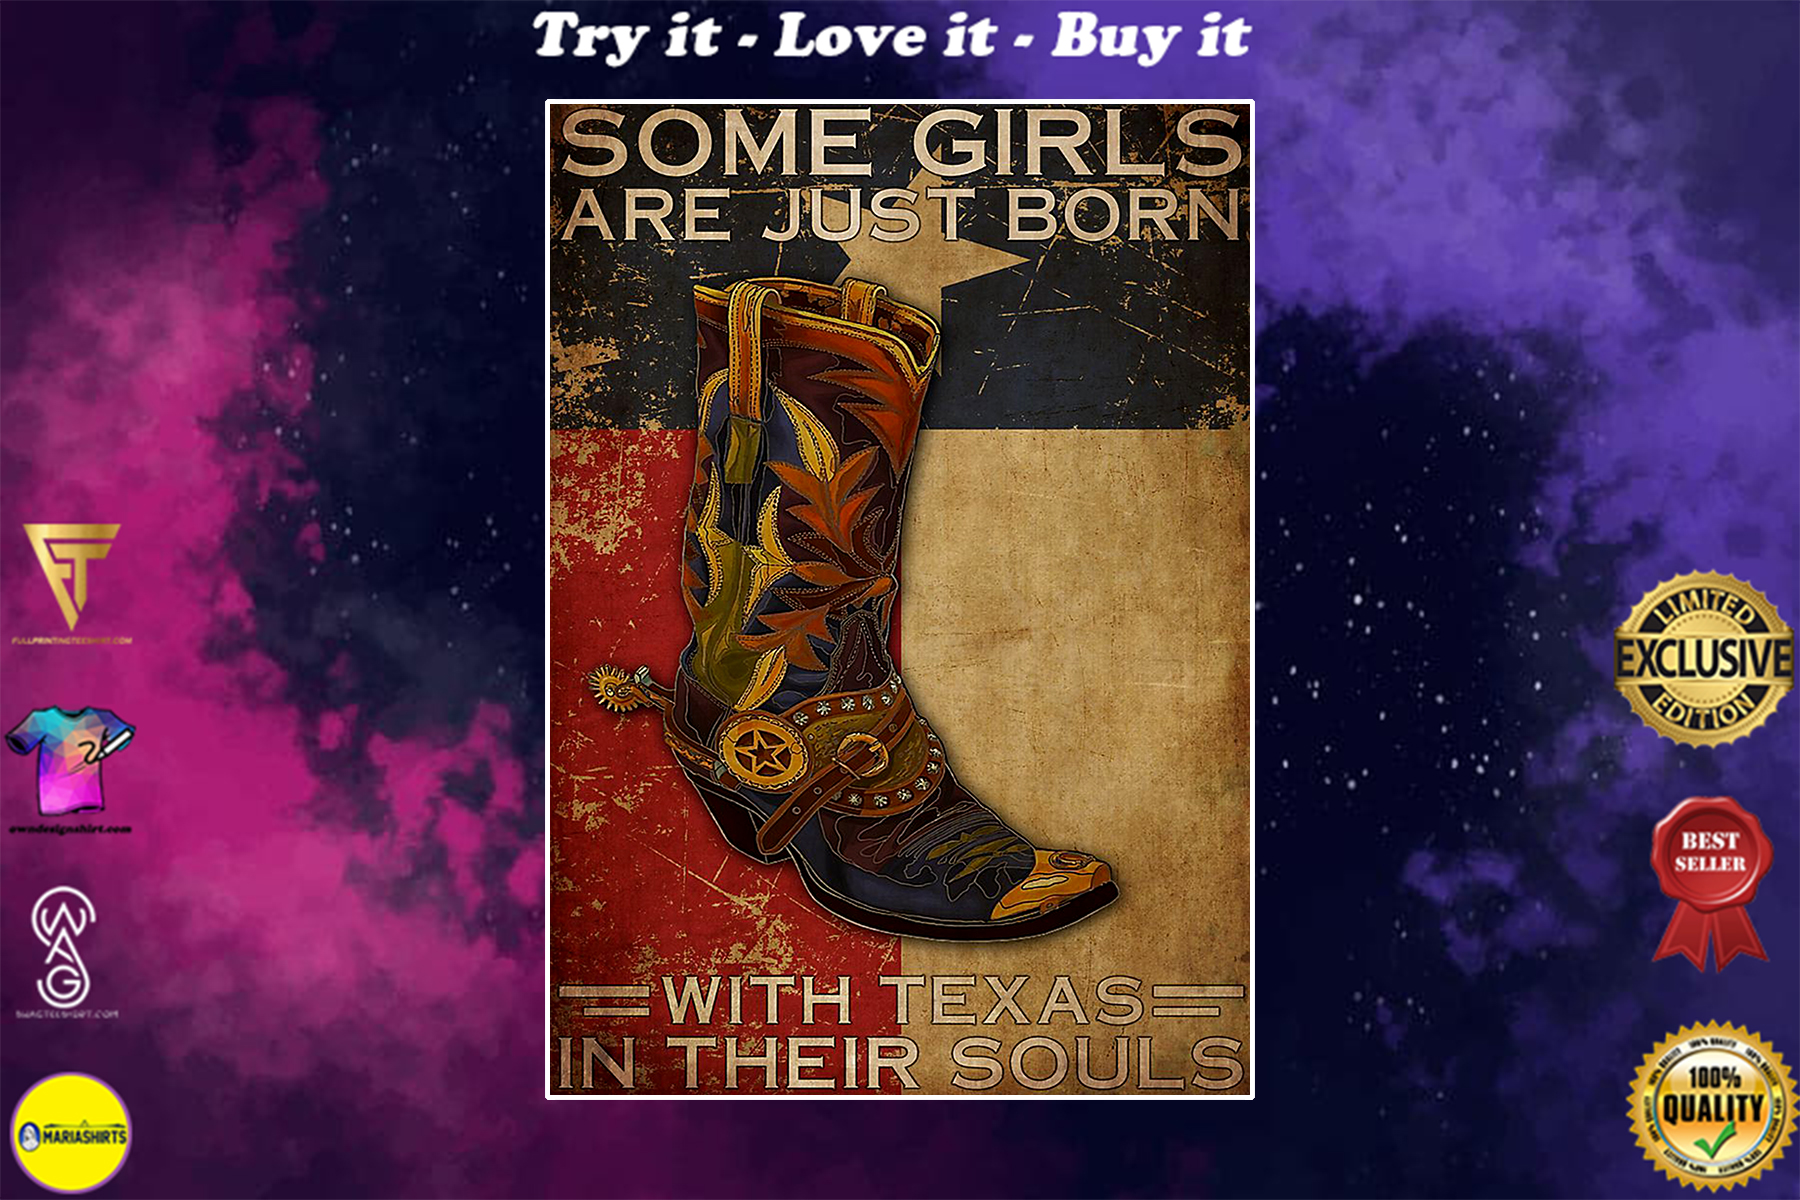 some girl are just born with texas in their souls vintage poster